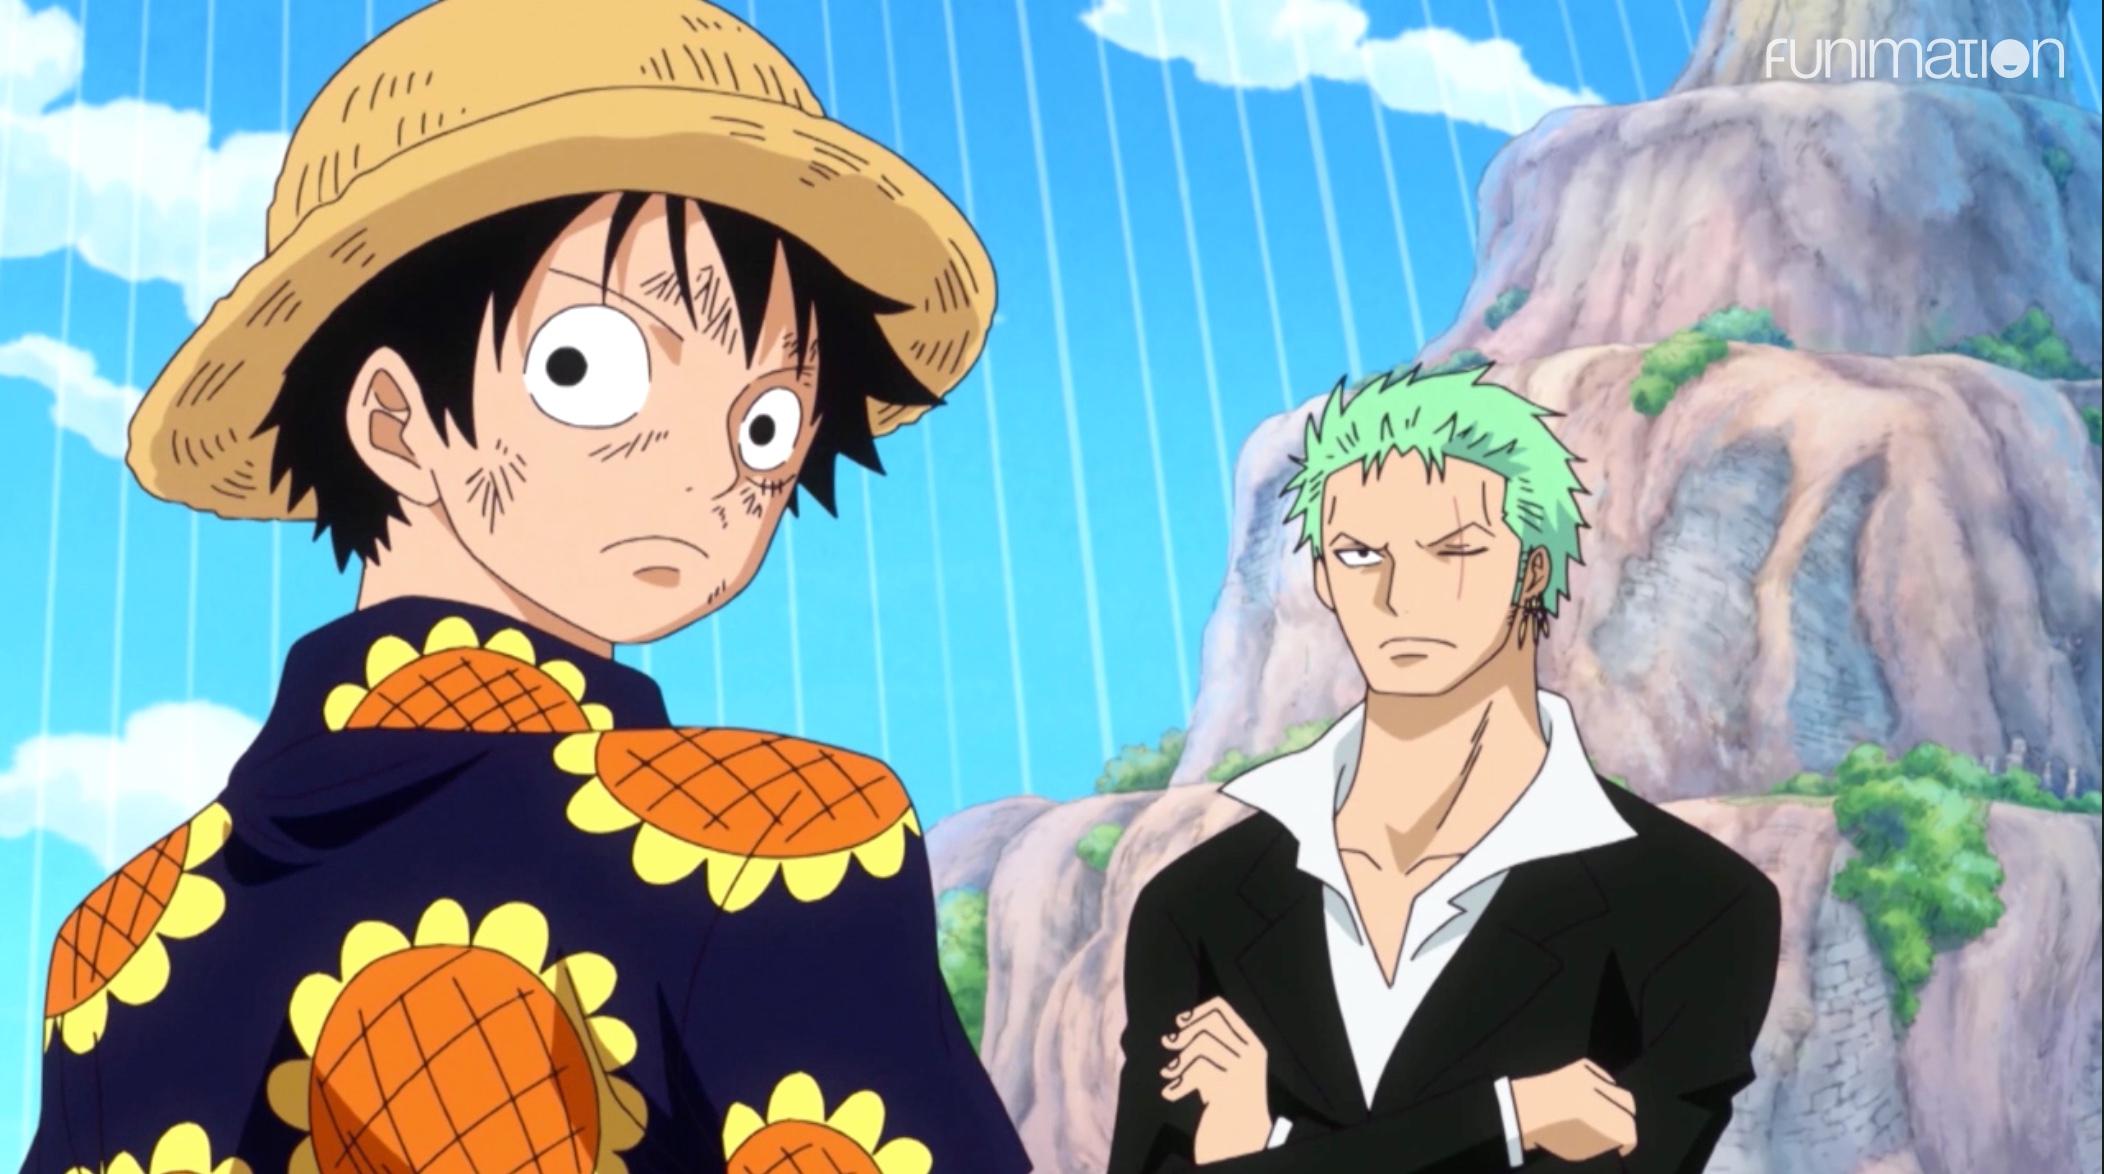 One Piece The Journey Heats Up For Luffy And The Straw Hats Season 11 Voyage 5 Episodes 681 693 Arrives In Digital Storefronts 4 6 Find Out When It Streams On